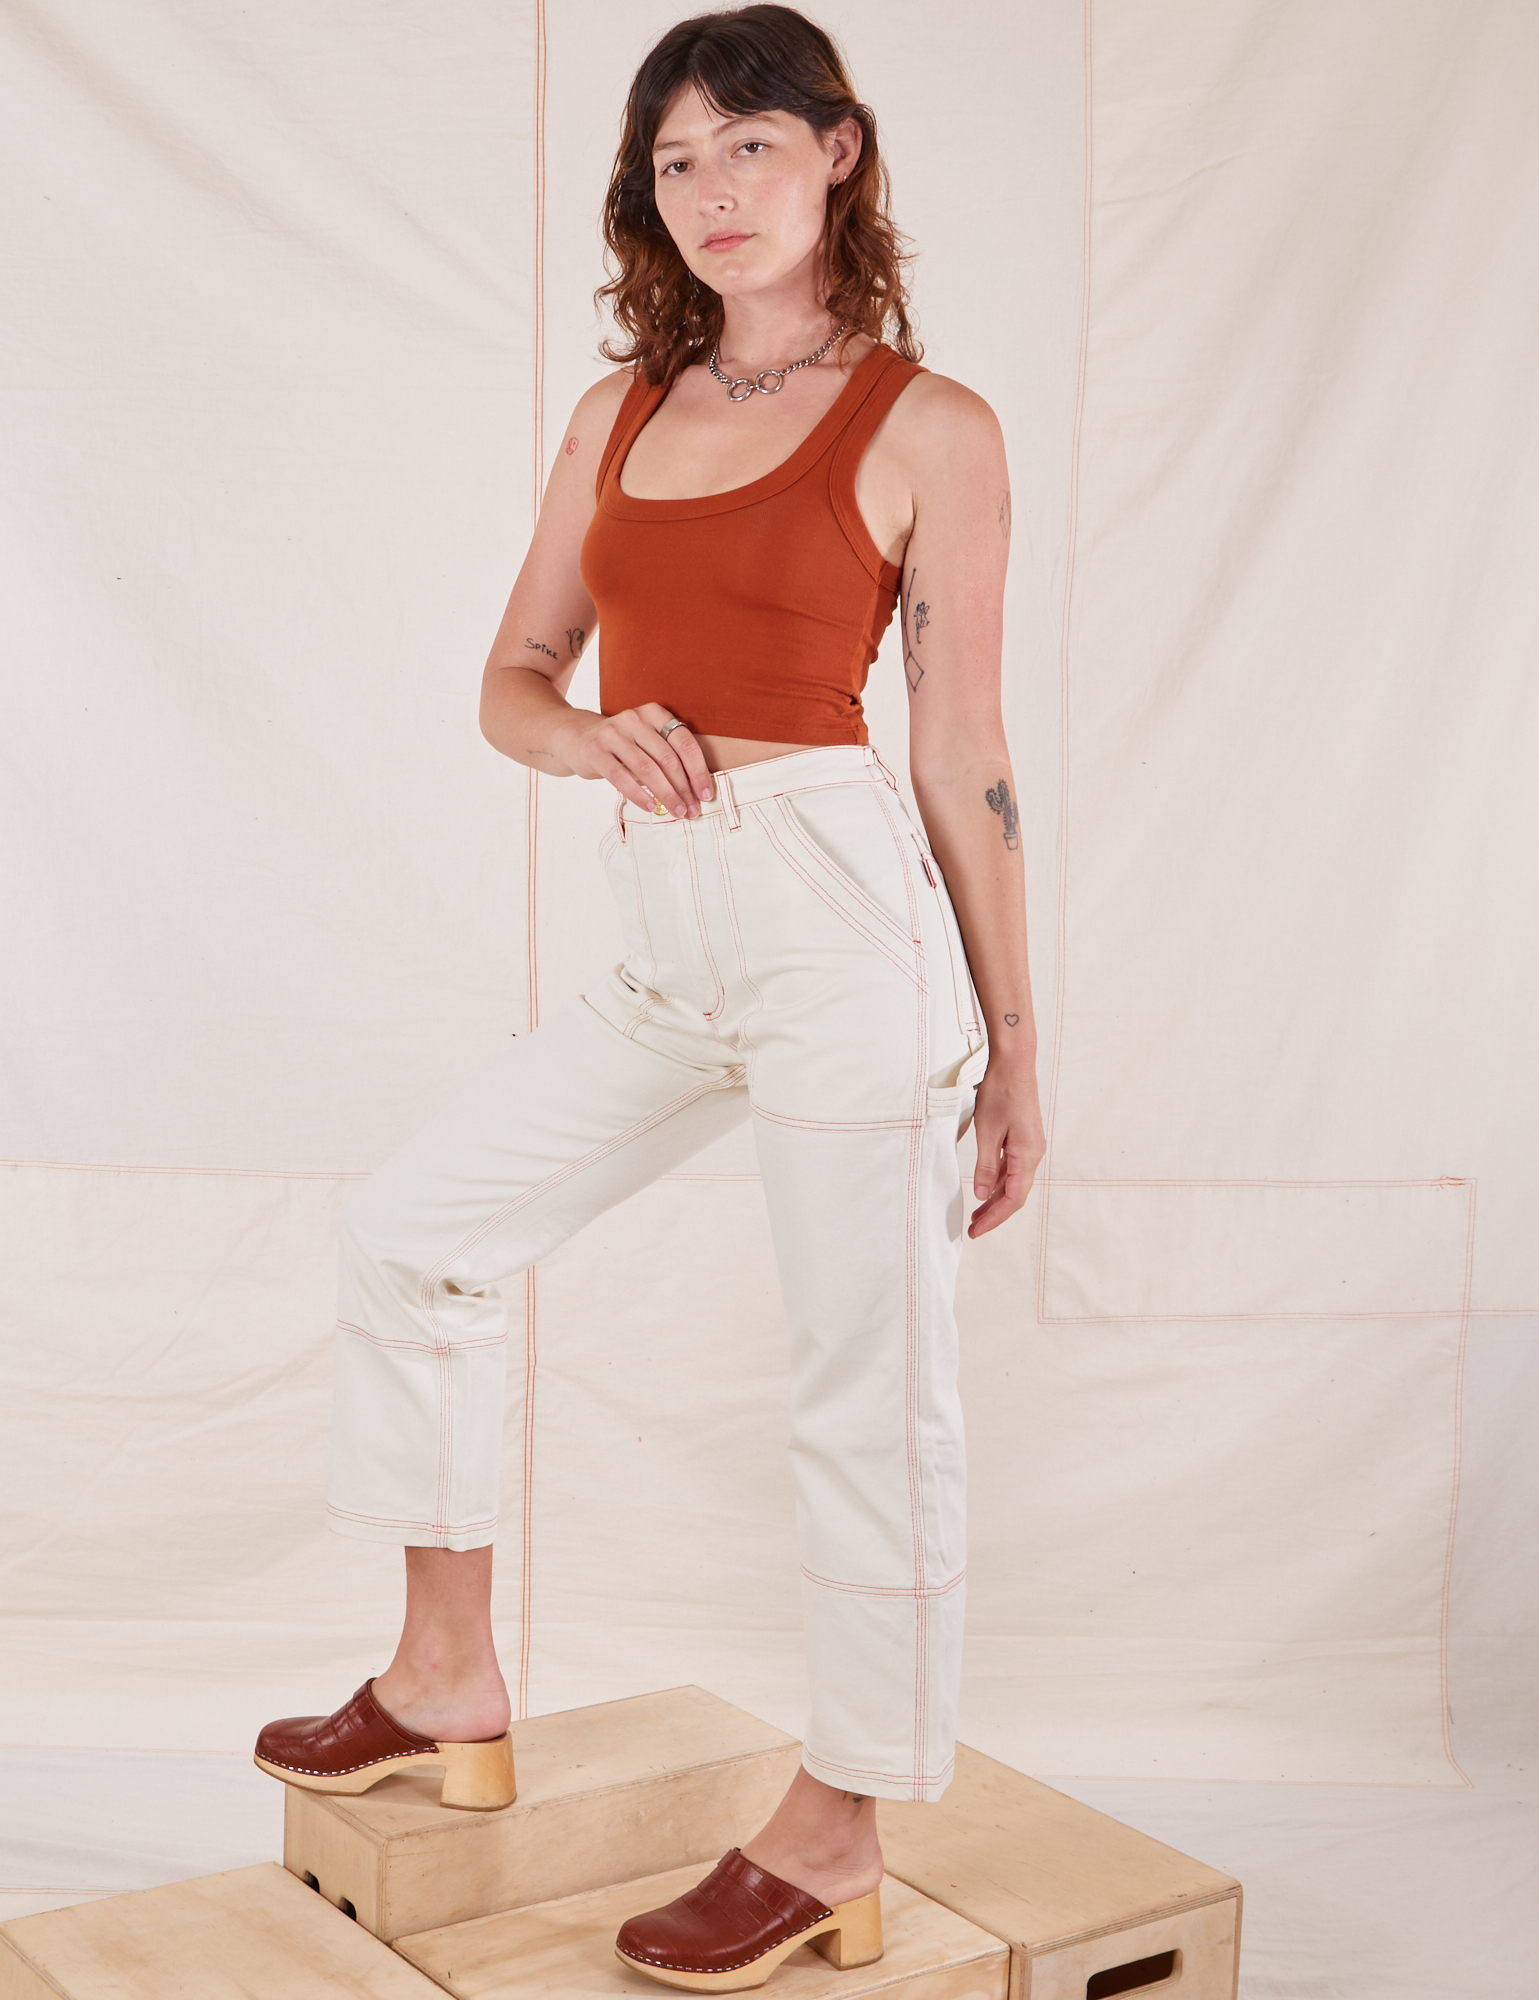 Alex is wearing Carpenter Jeans in Vintage Tee Off-White and burnt terracotta Cropped Tank Top